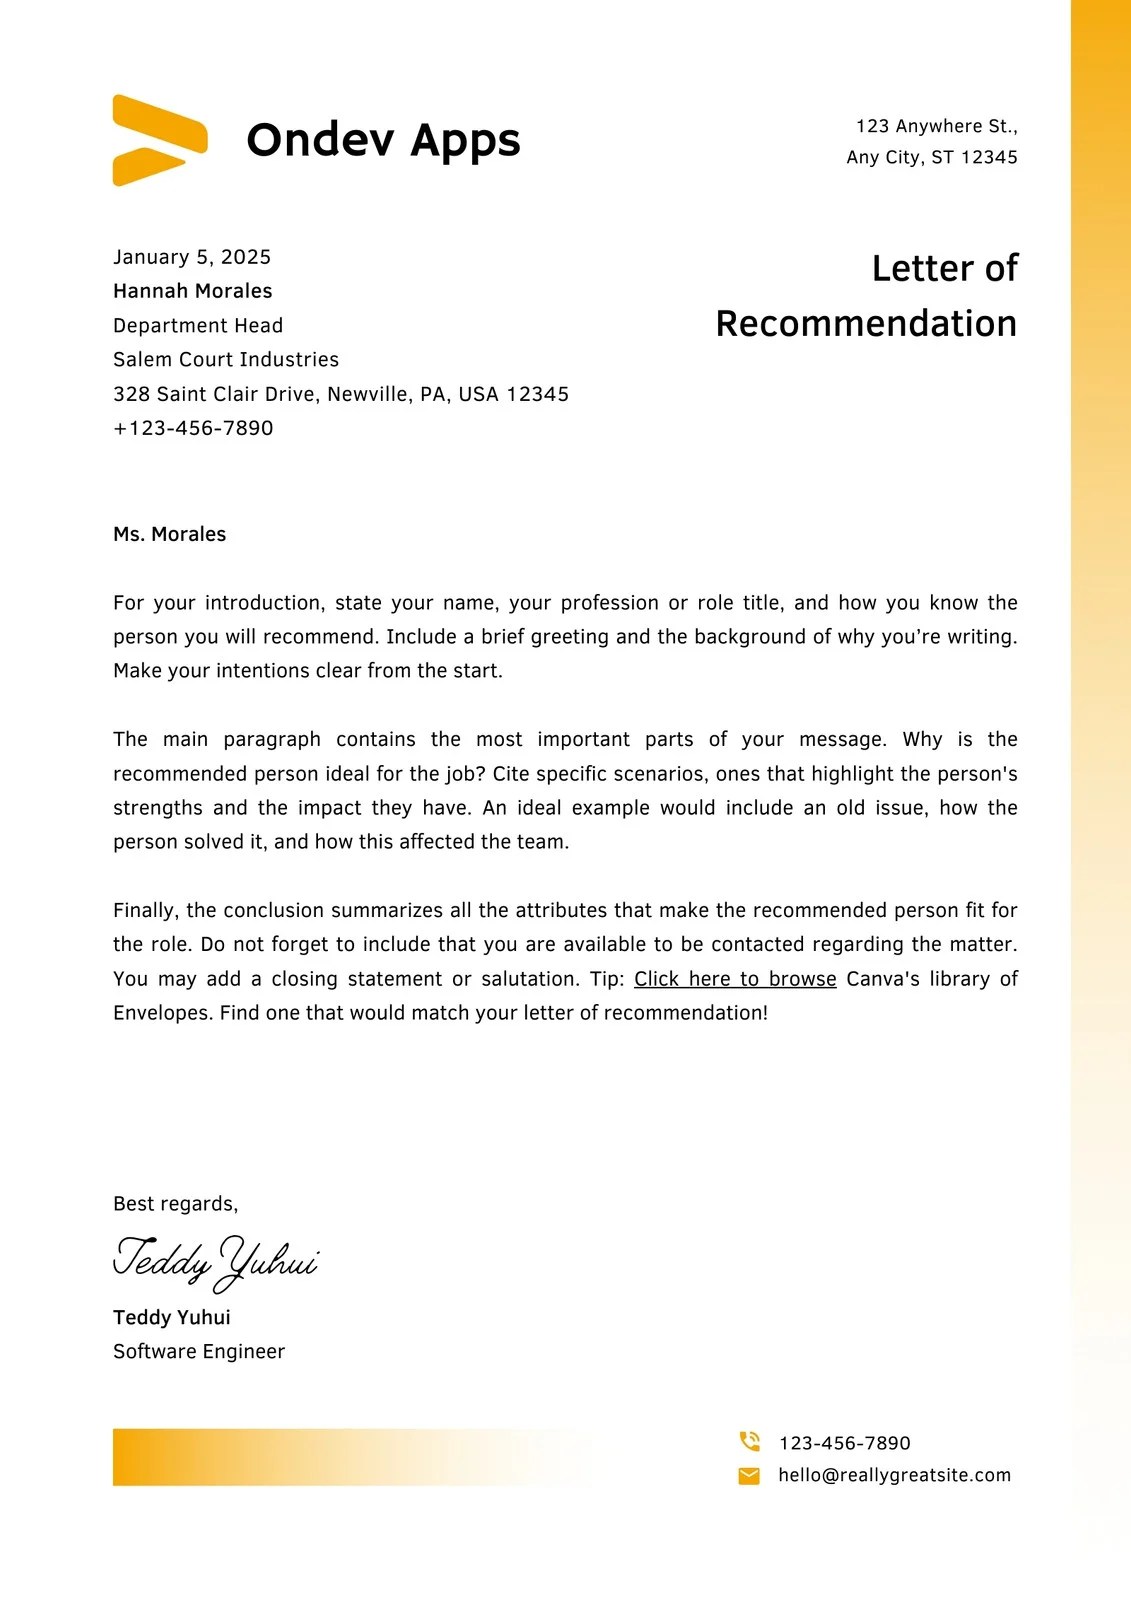 Sample Letter Of Recommendation For Character Reference